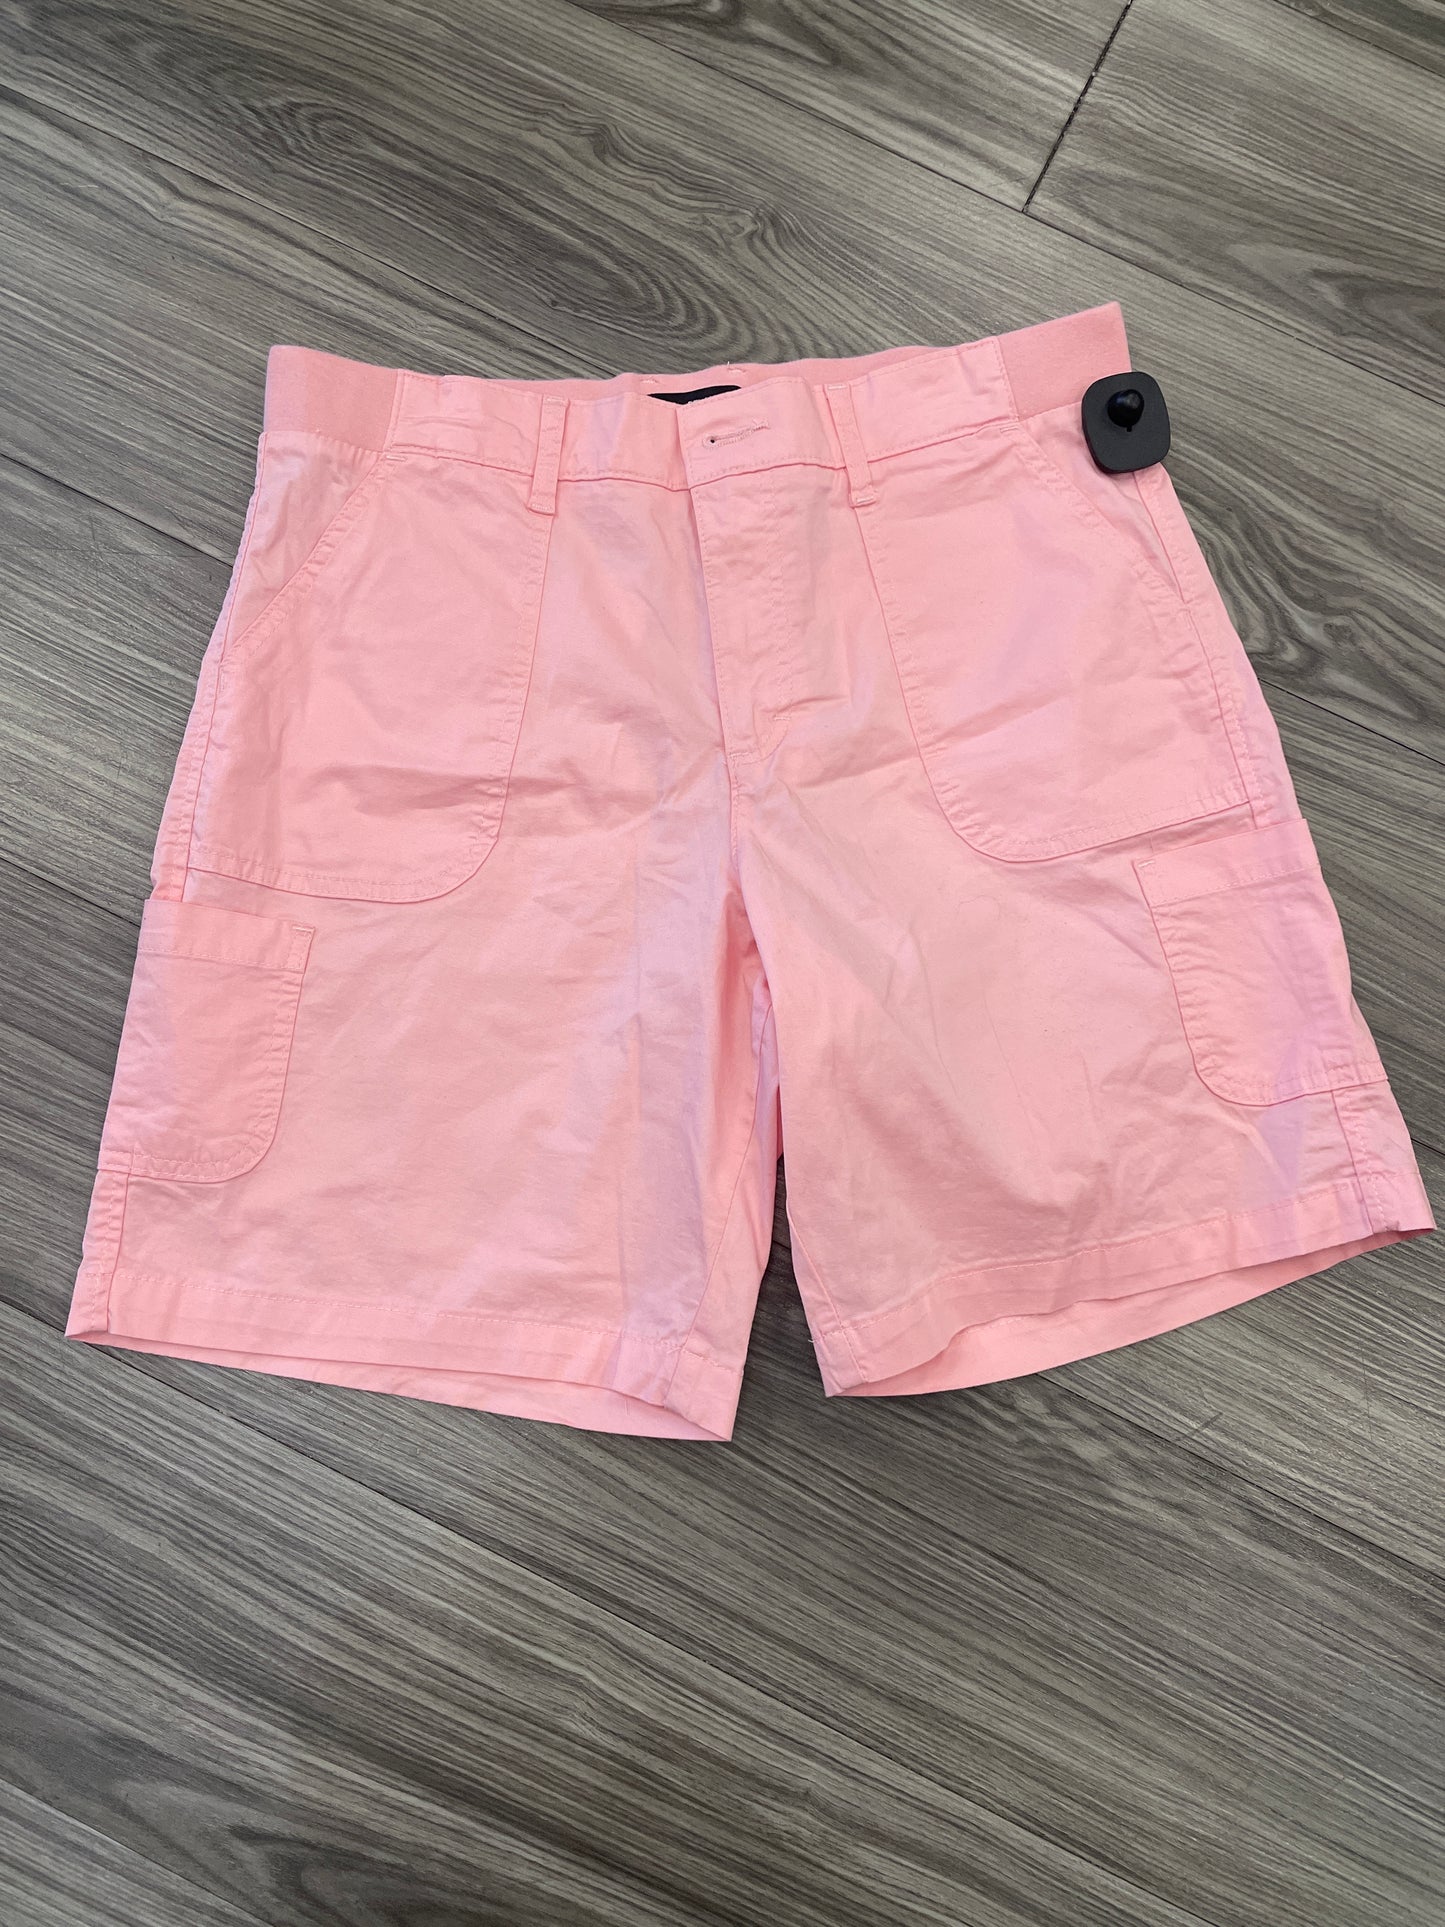 Shorts By Lee  Size: 14